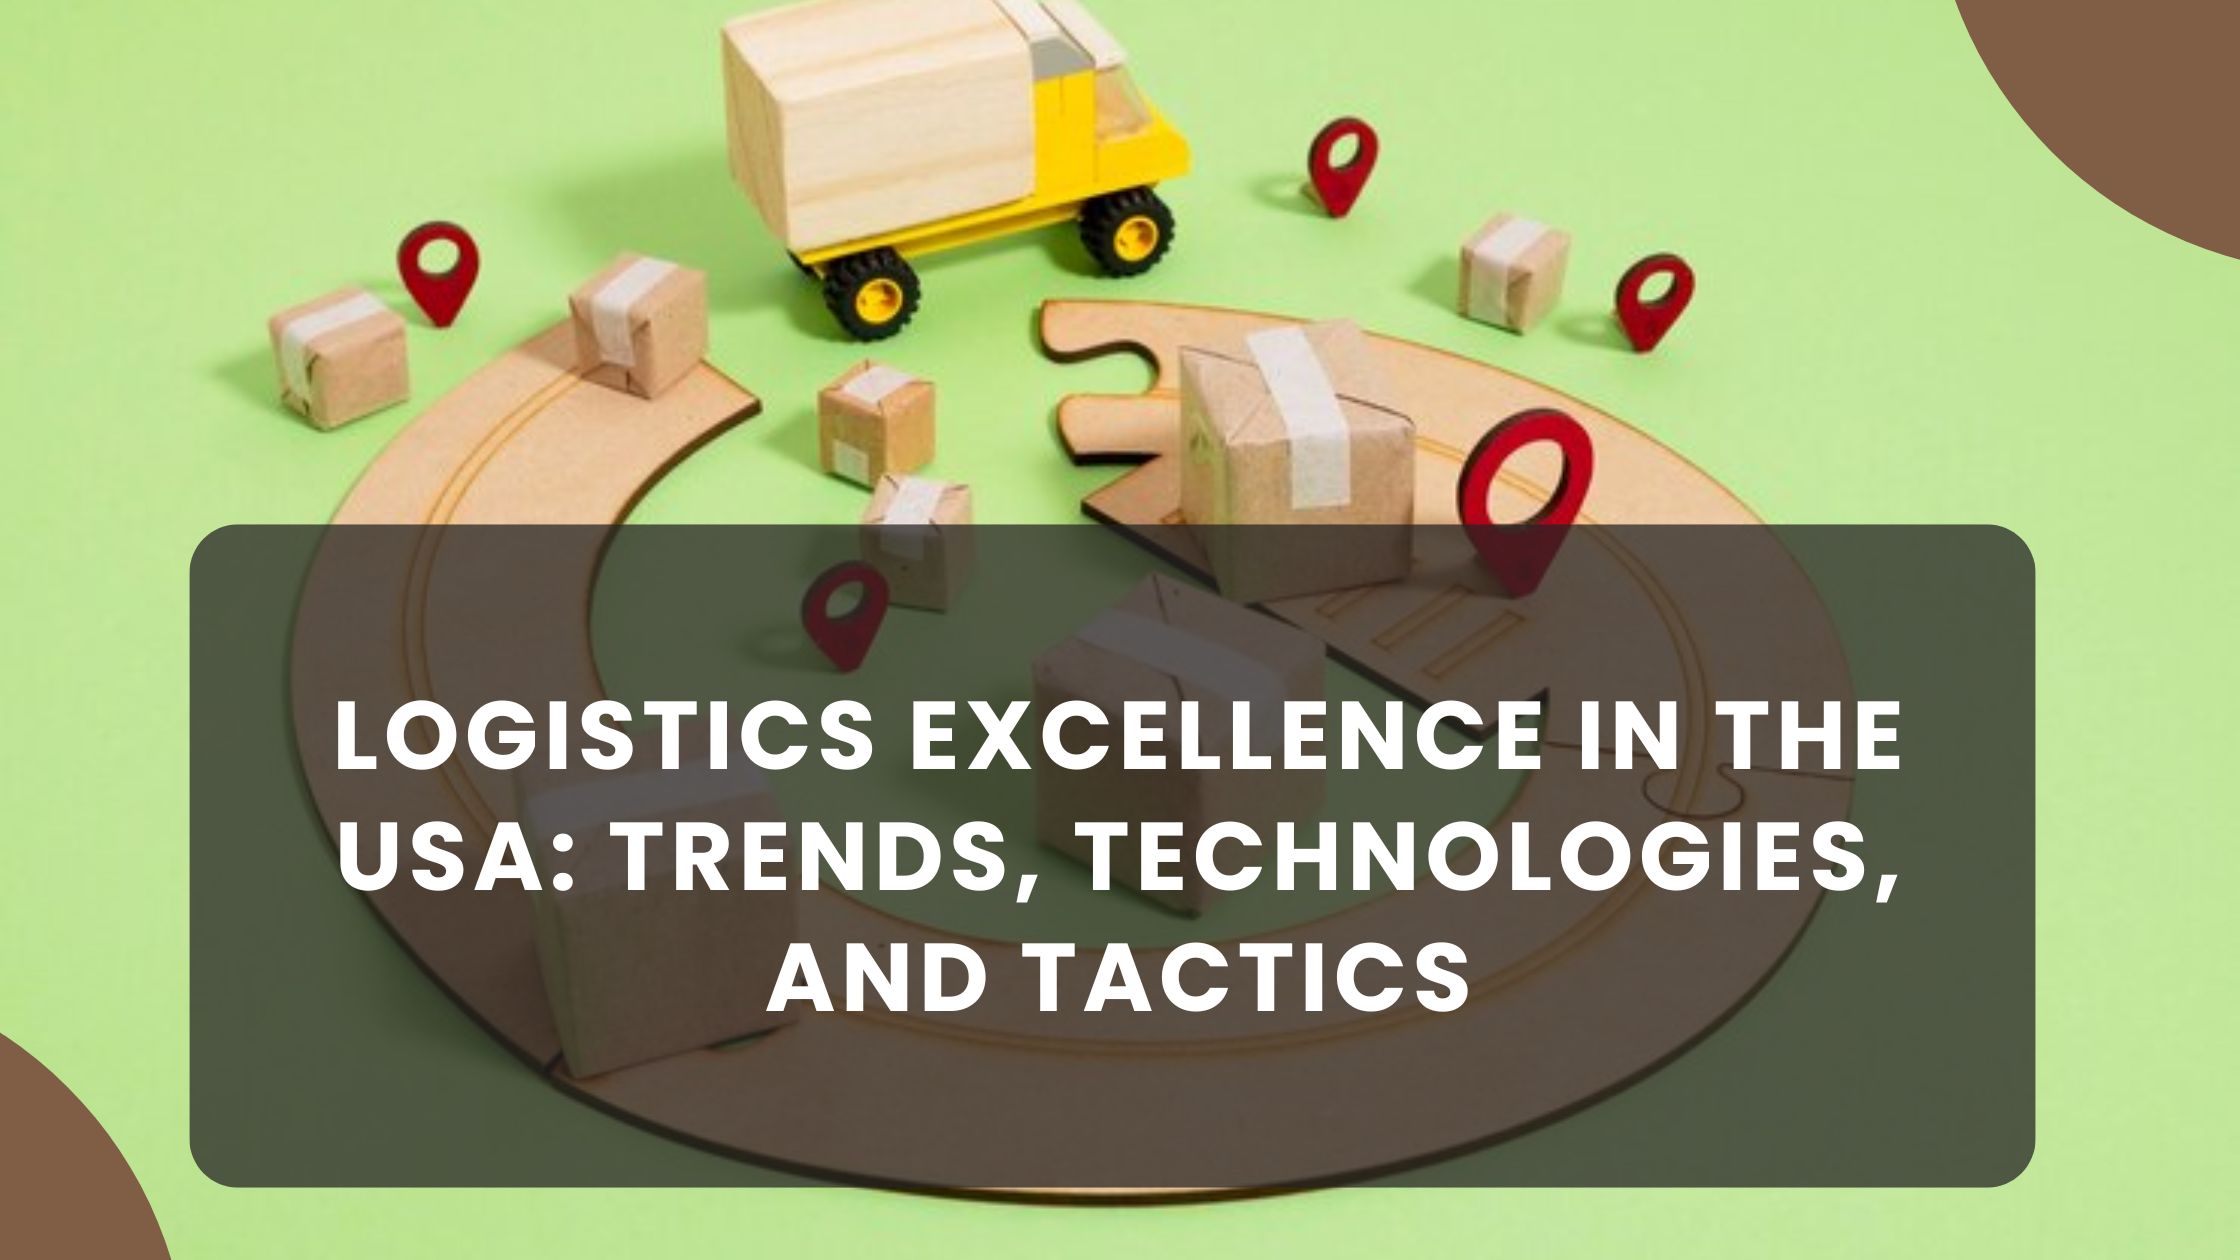 Logistics Excellence in the USA: Trends, Technologies, and Tactics